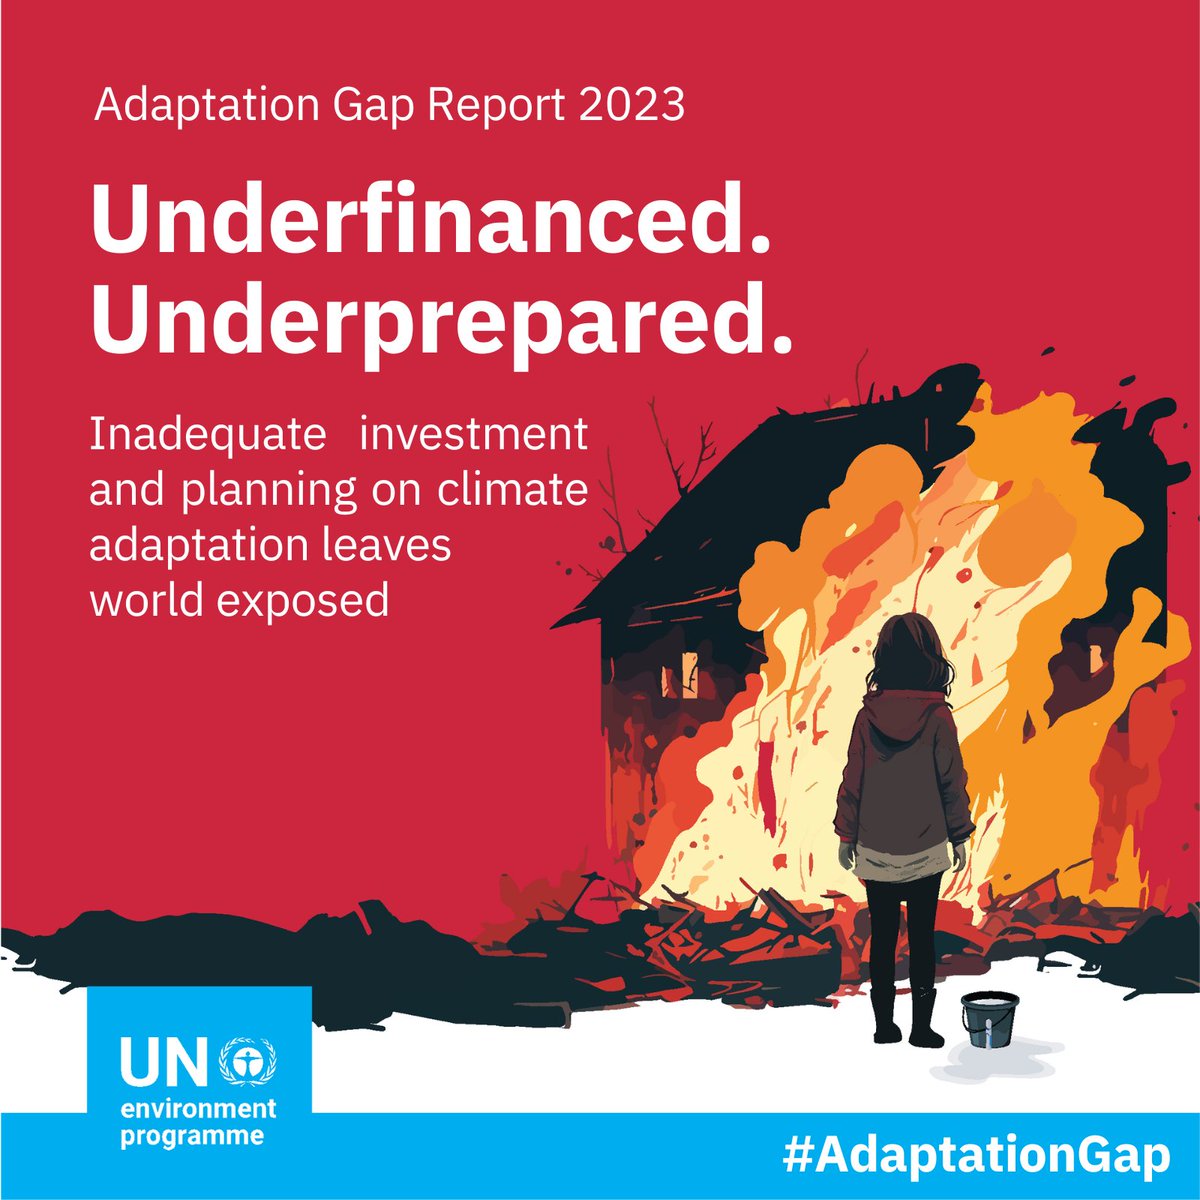 UNEP’s 2023 #AdaptationGap Report found that progress on adaptation is slowing on all fronts when it should be speeding up to catch up with rising climate impacts. This new year, let’s shift the narrative to more innovative climate adaptation solutions: unep.org/resources/adap…